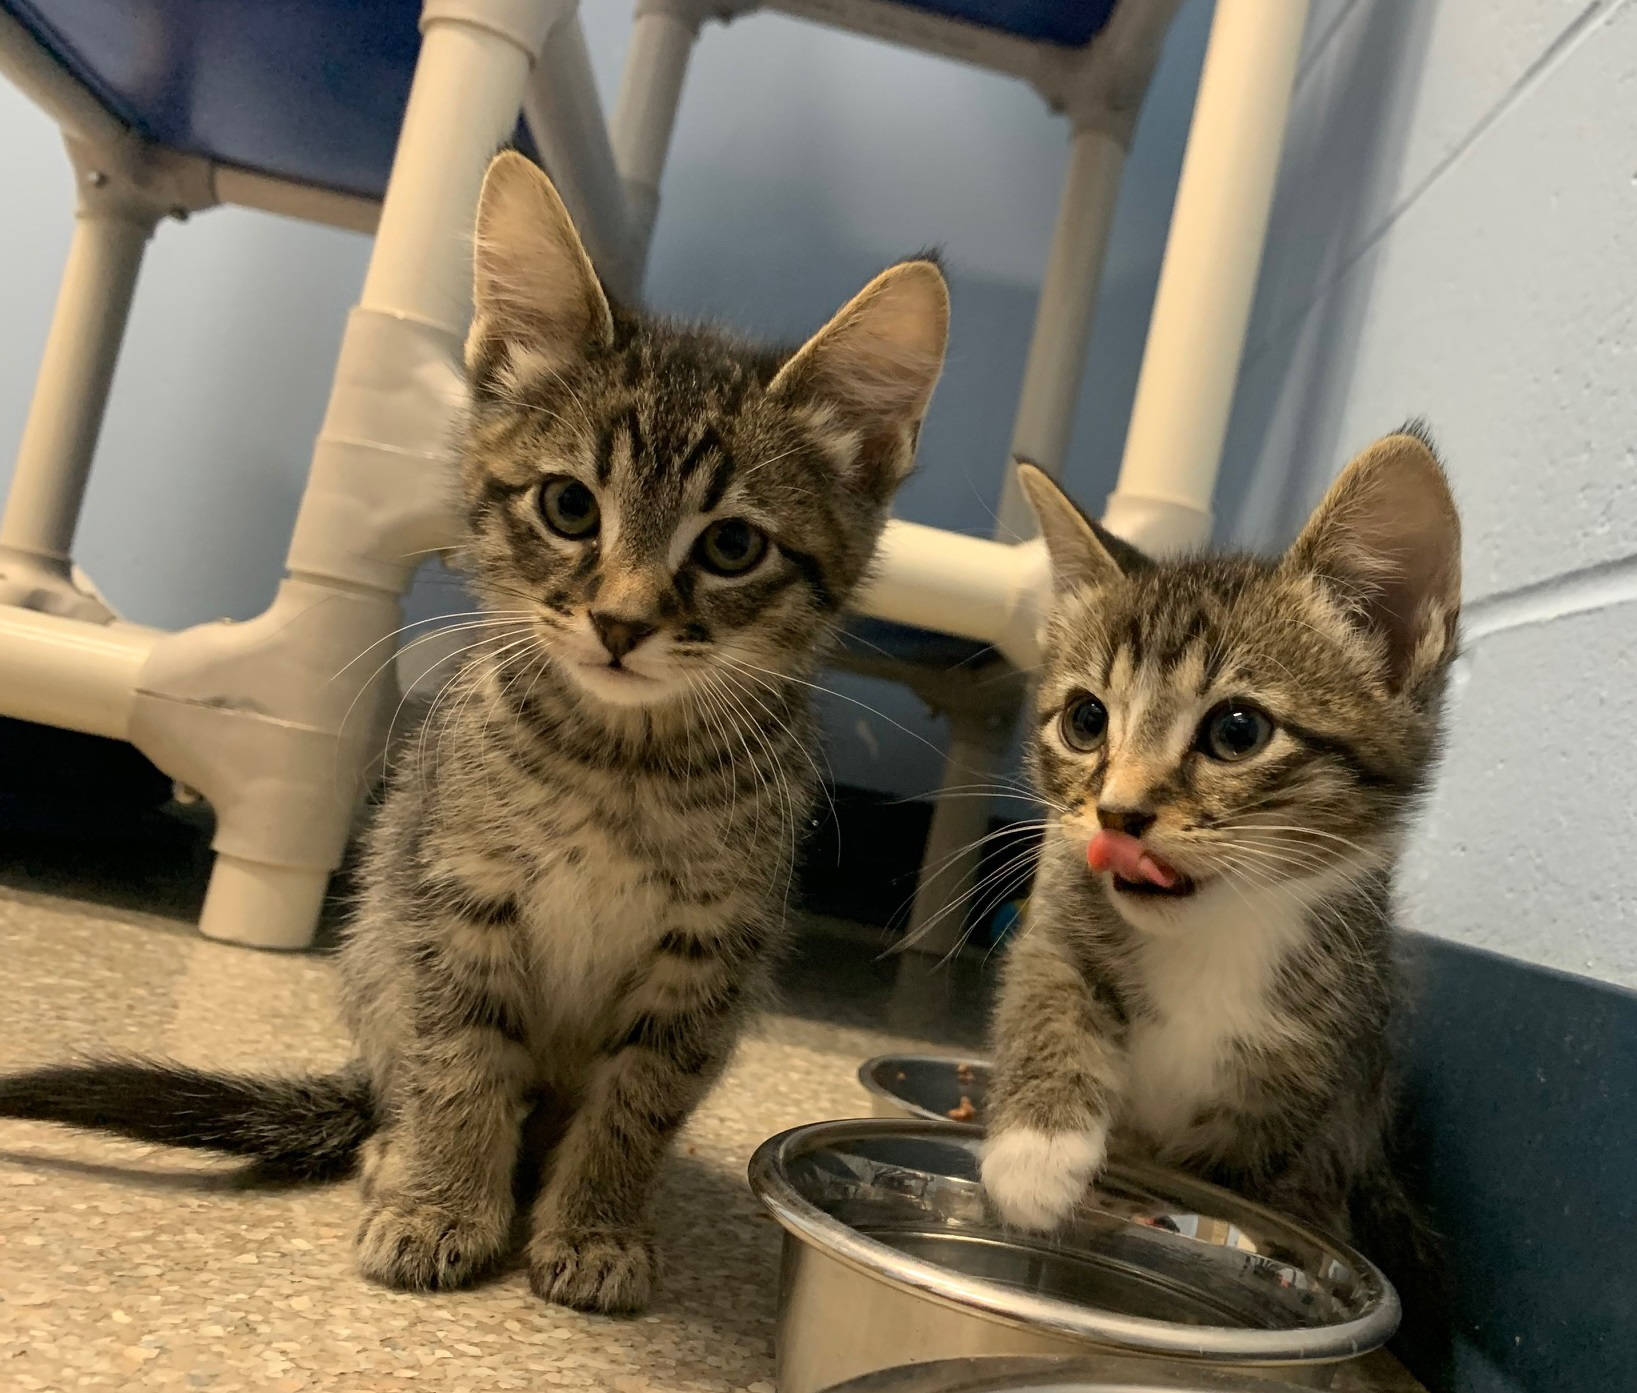 Pets of the Week Hans and Franz, as seen Saturday, Dec. 19, 2020, at the Homer Animal Shelter in Homer, Alaska. (Photo courtesy Alaska Mindful Paws)